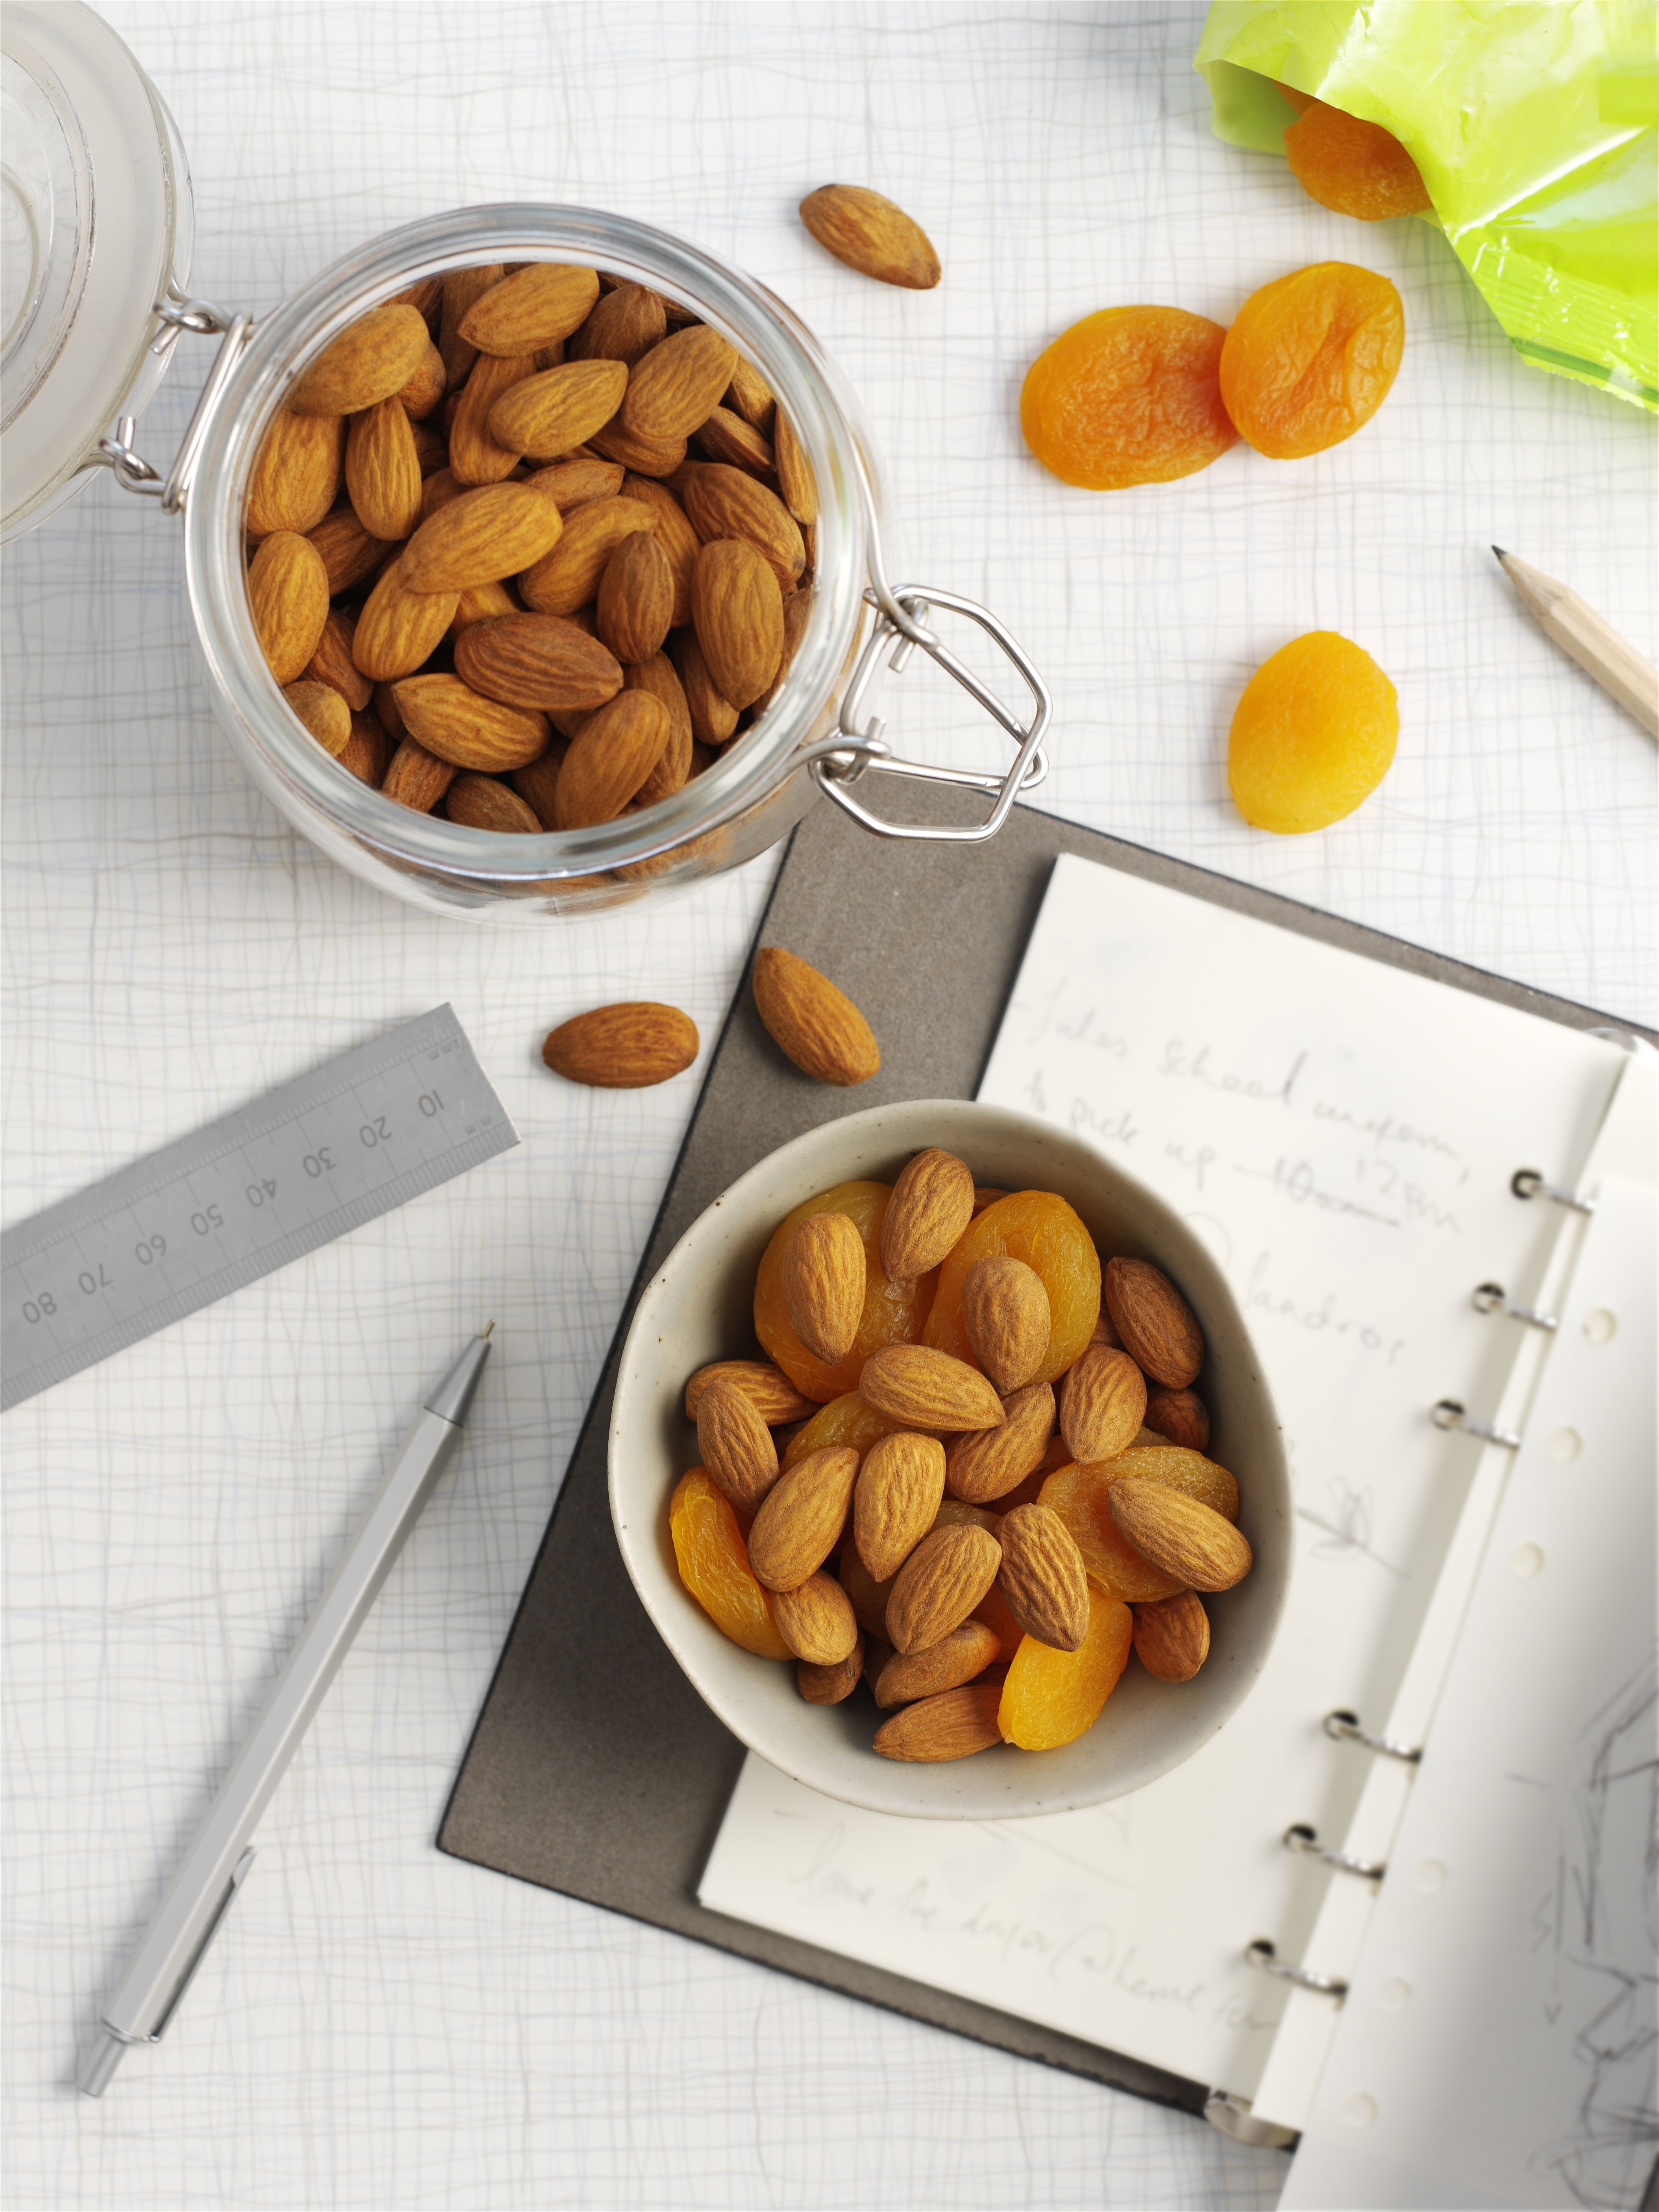 almonds with dried apricots